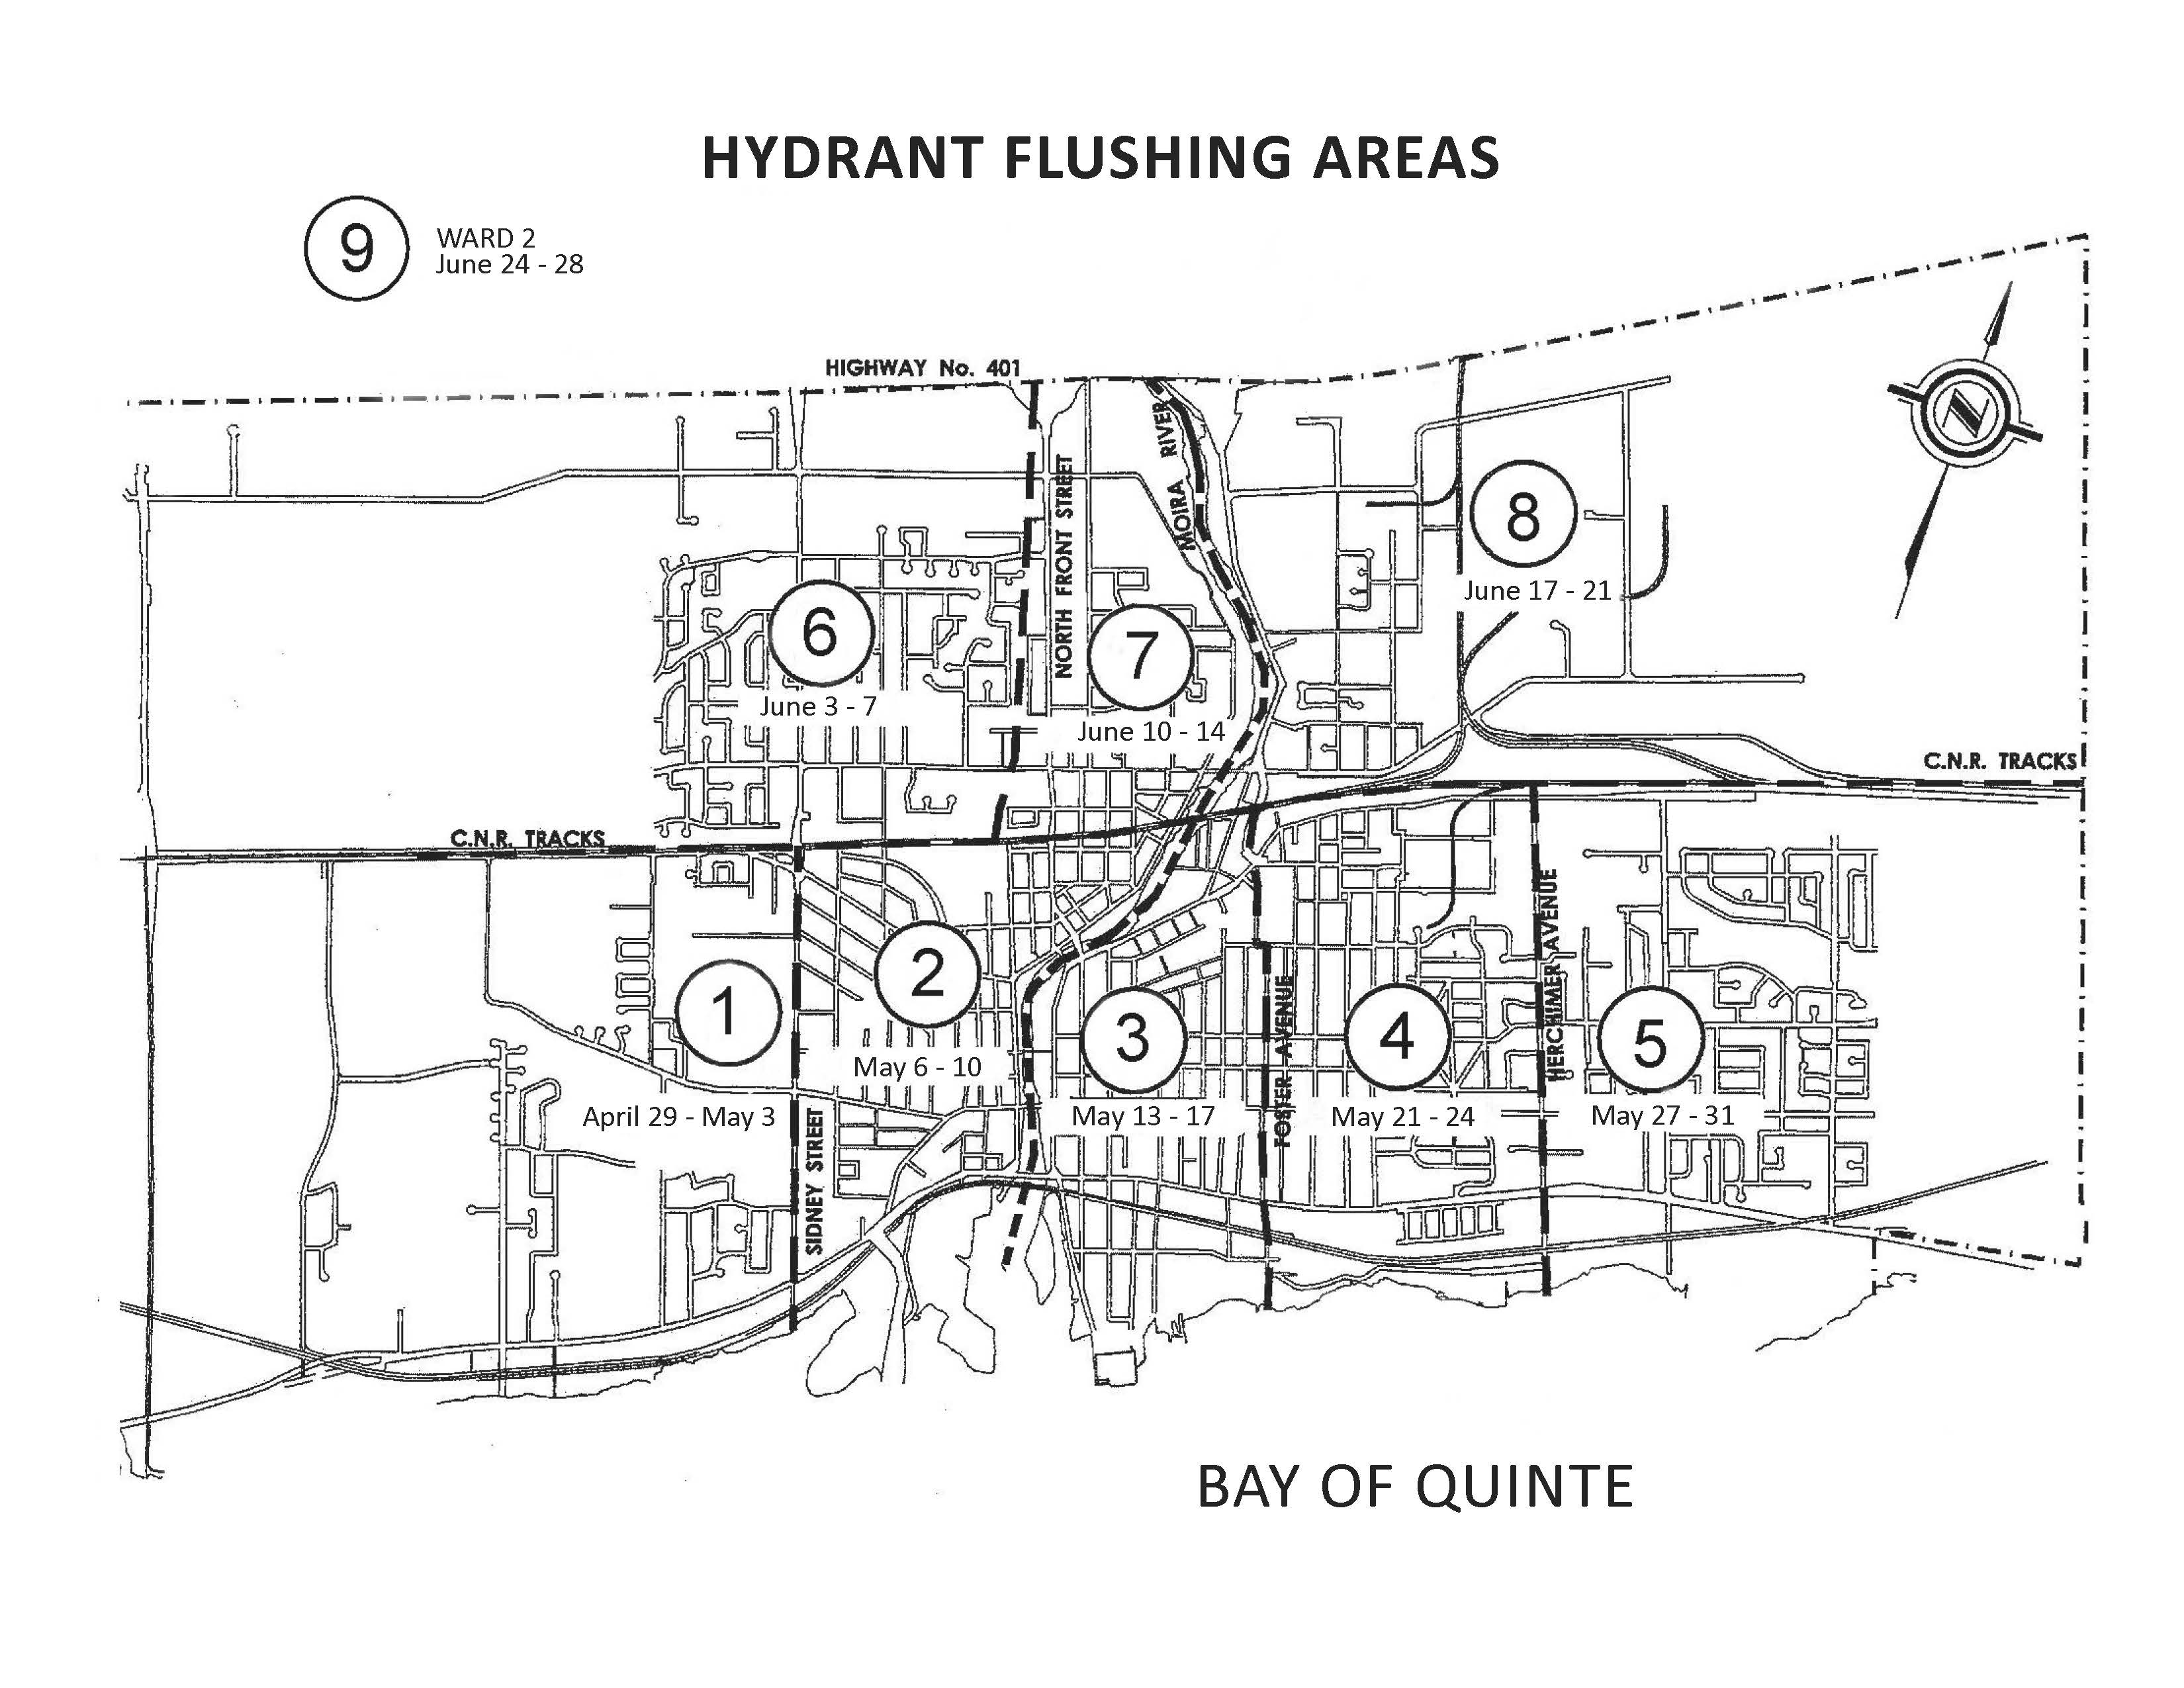 Hydrant Flushing Schedule Map